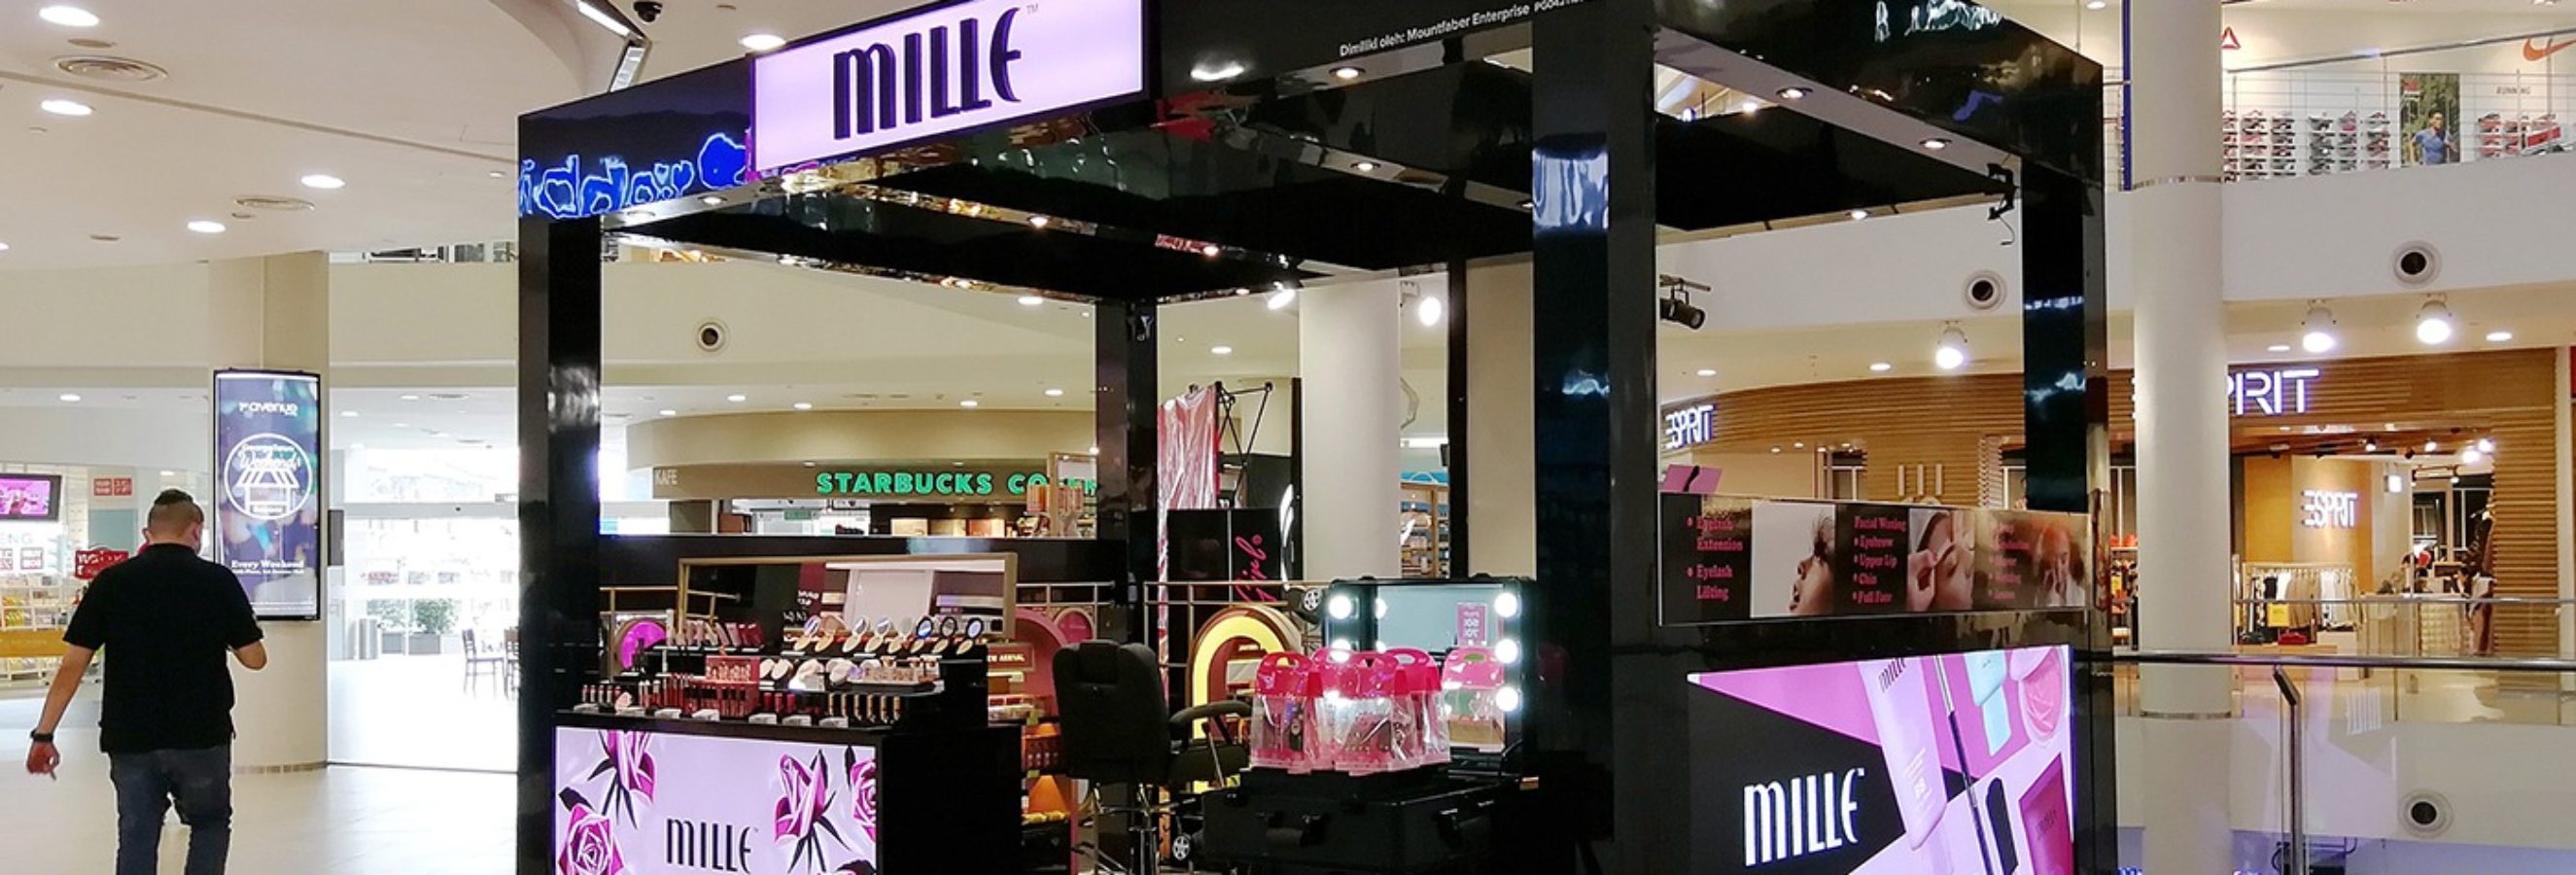 Mille beauty and makeup product pop up kiosk on the first floor of 1st Avenue shopping mall